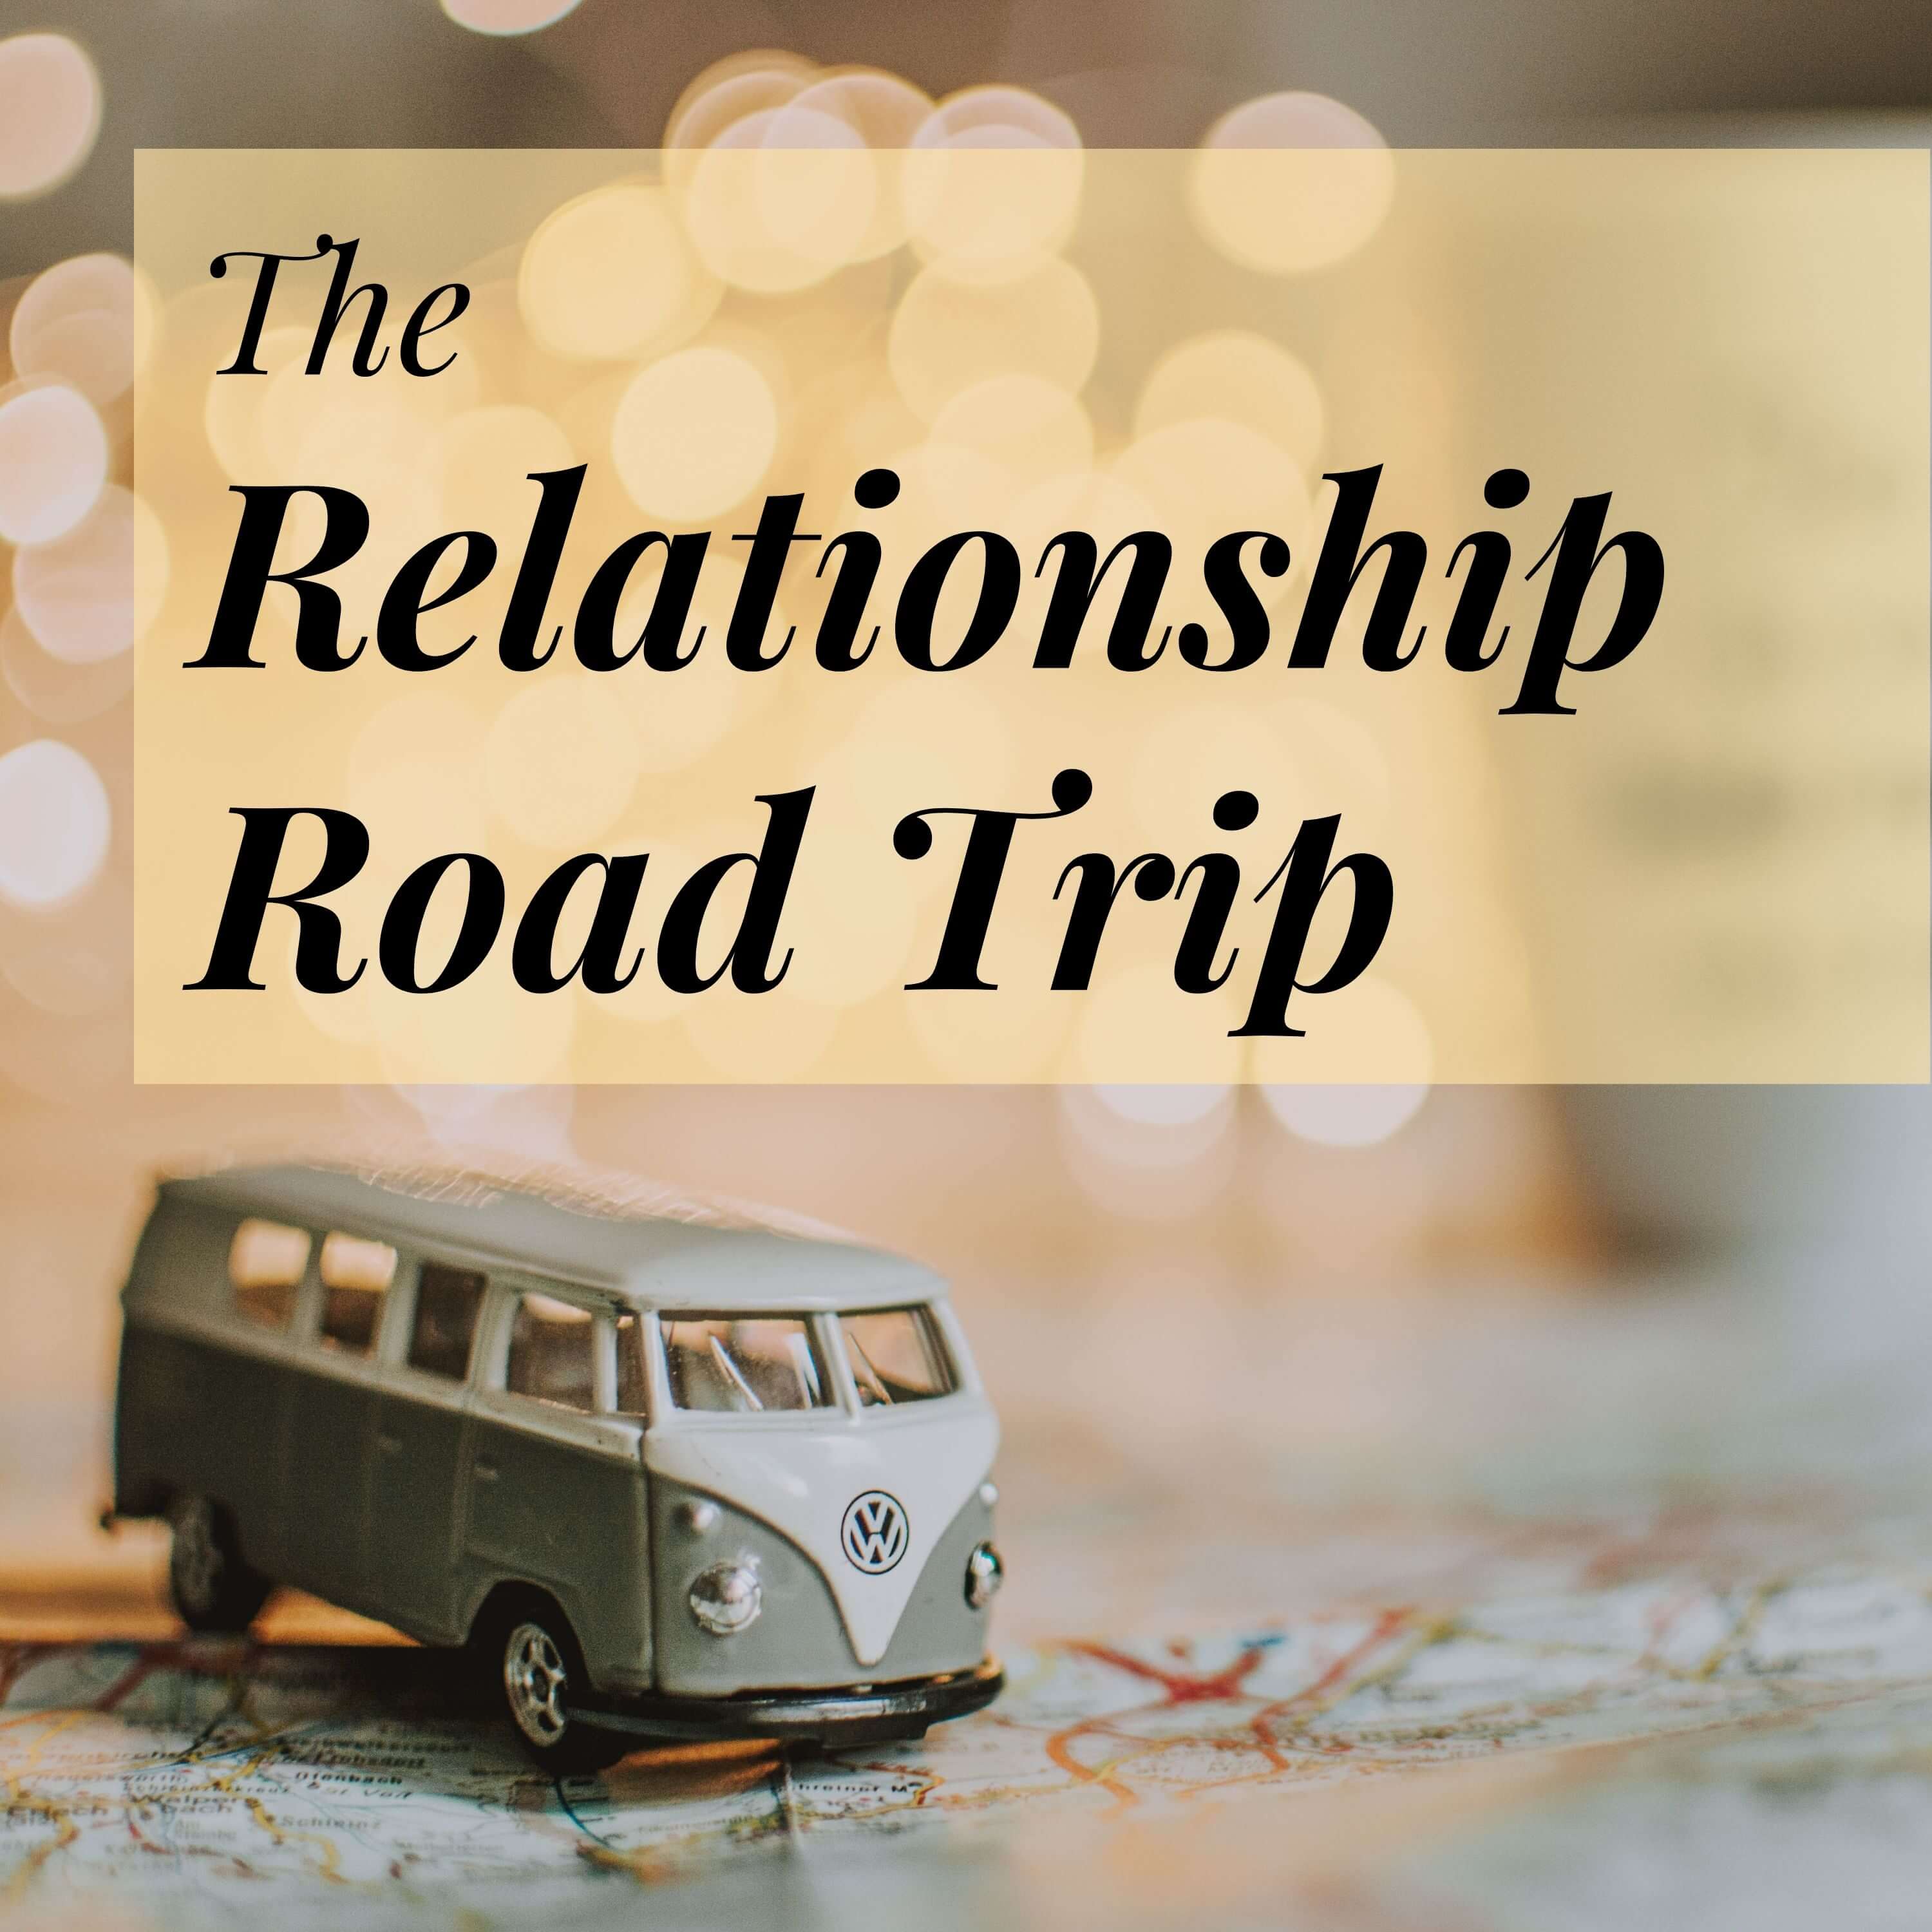 Artwork for The Relationship Road Trip